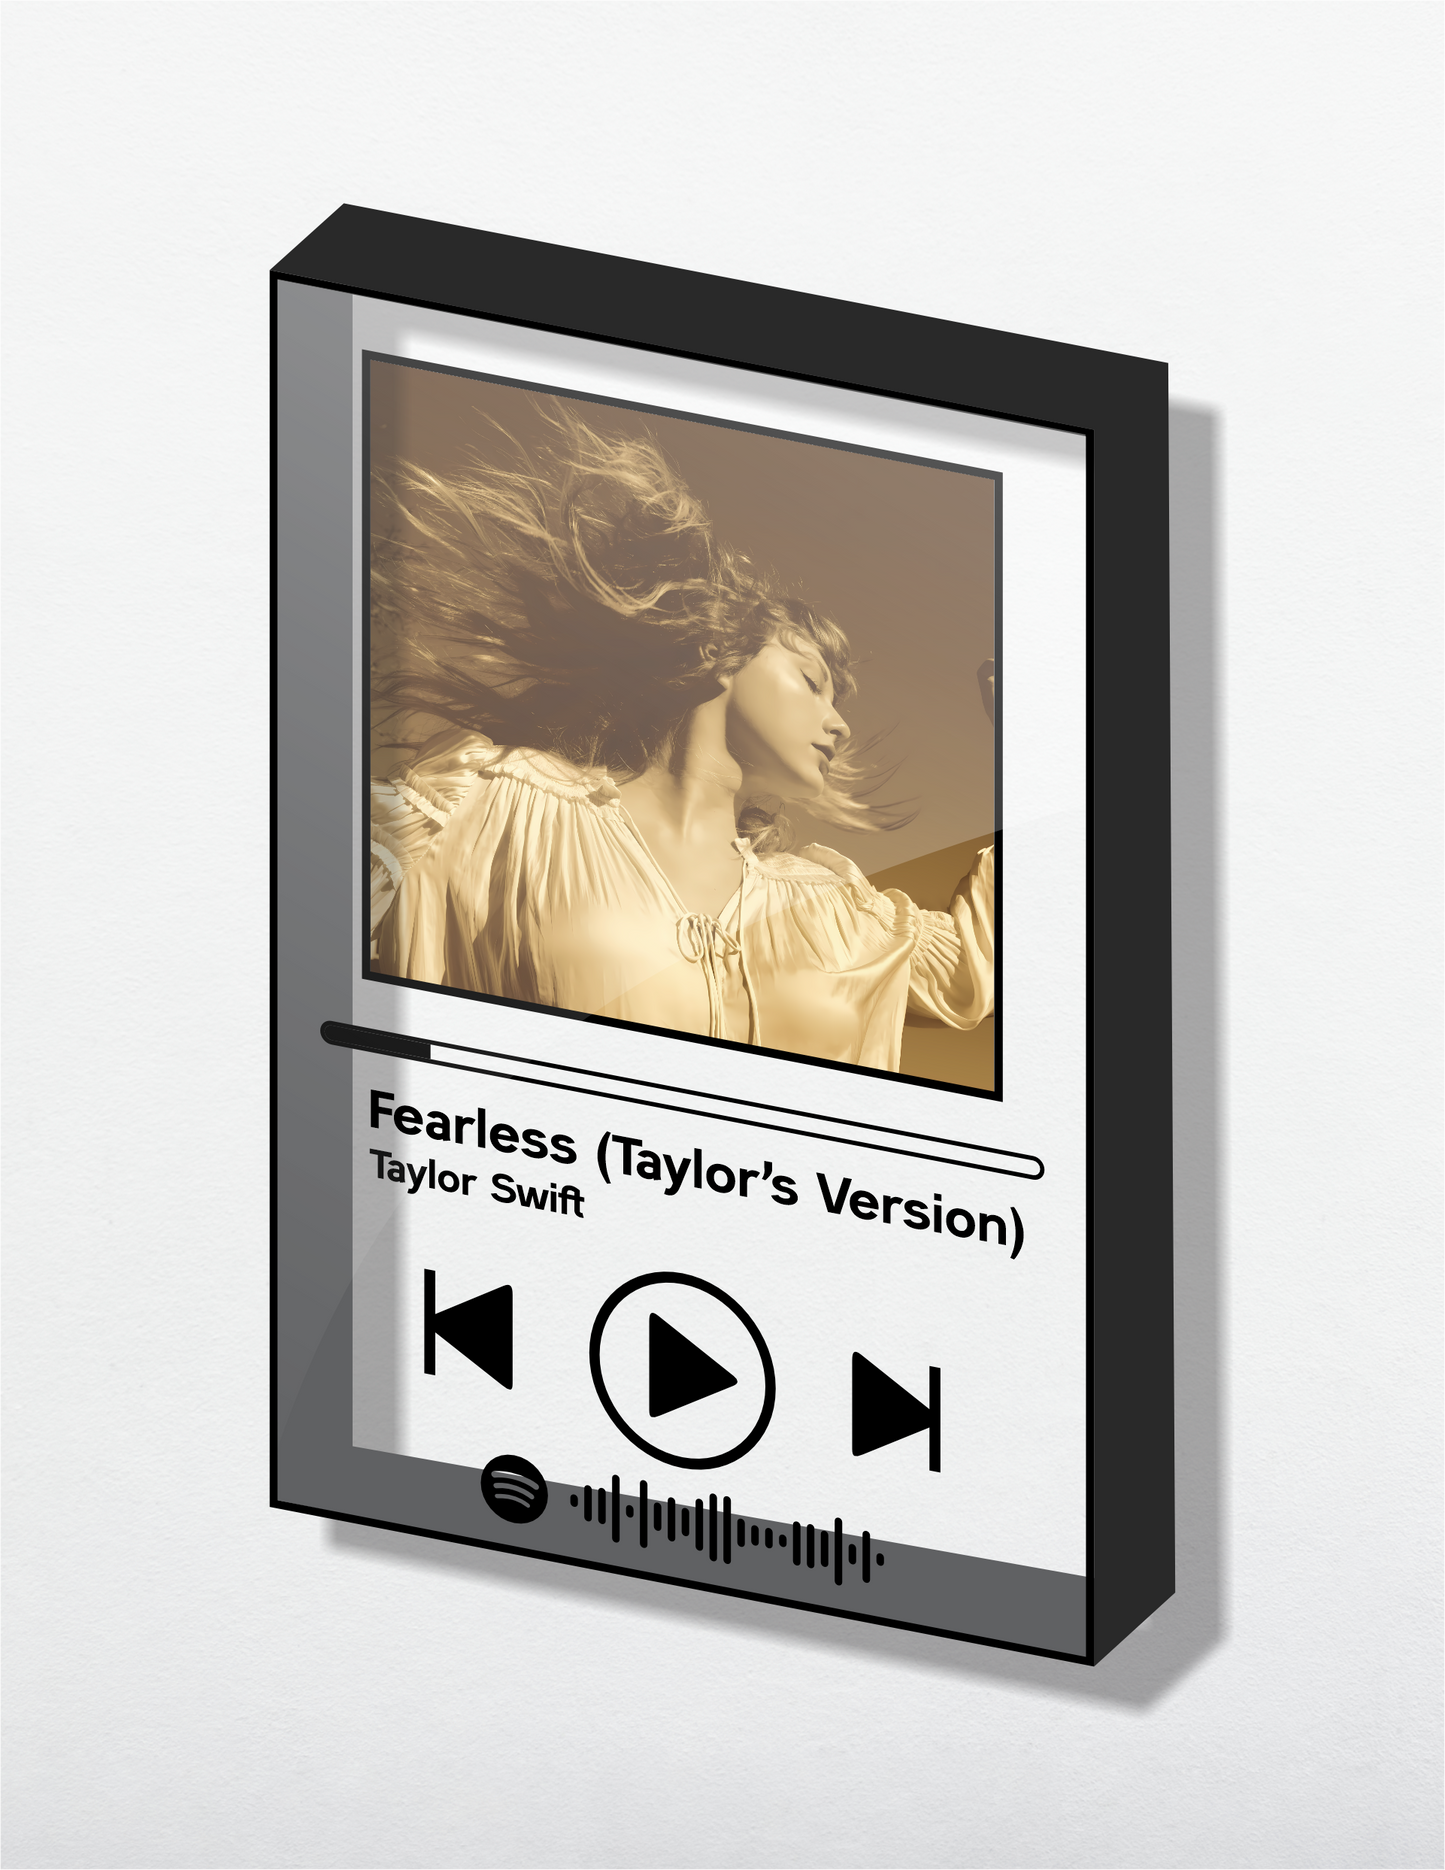 Fearless (Taylor's Version) of Taylor Swift Acrylic Album art. Music themed Wall Art